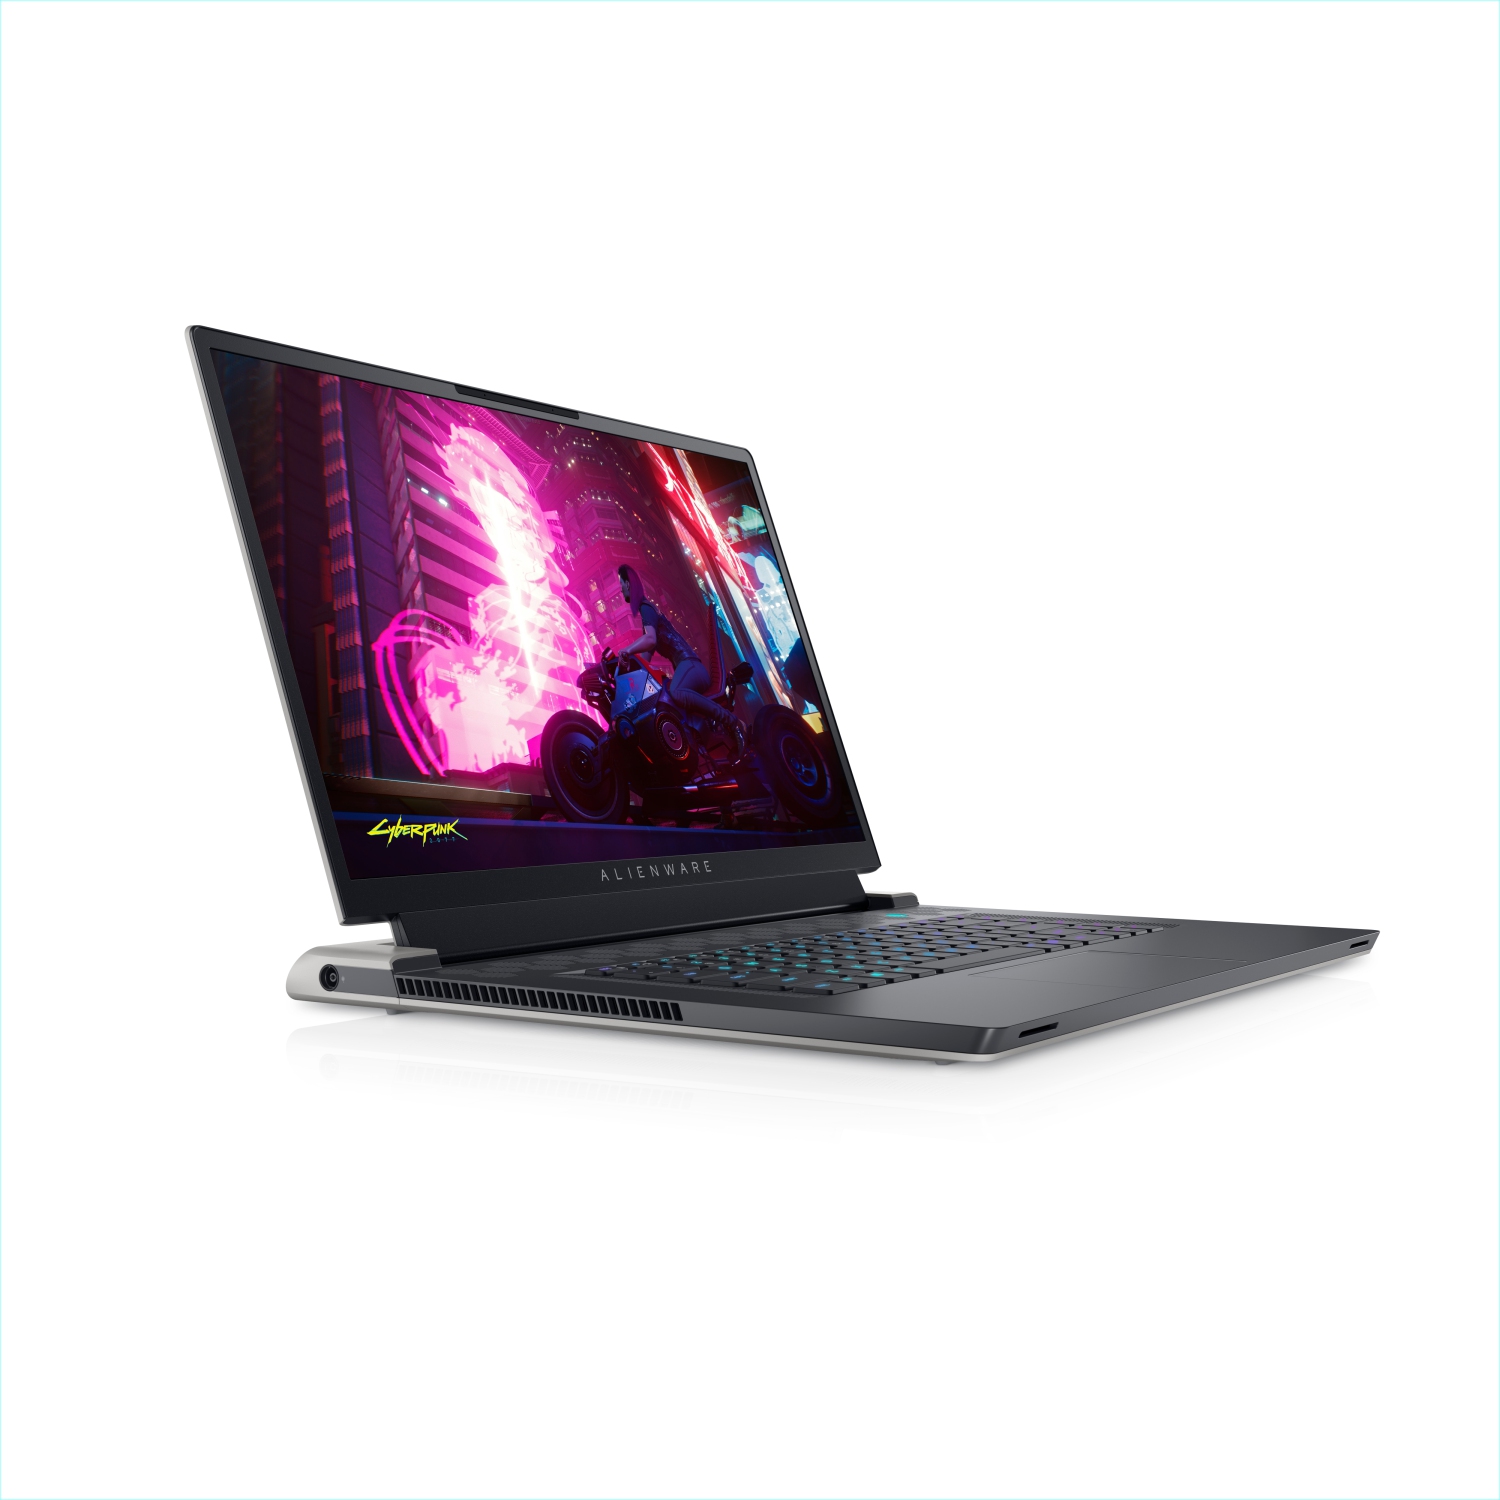 Refurbished (Excellent) - Dell Alienware X17 R1 Gaming Laptop (2021), 17.3" FHD, Core i9, 256GB SSD, 32GB RAM, RTX 3080, 8 Cores @ 5 GHz, 11th Gen CPU Certified